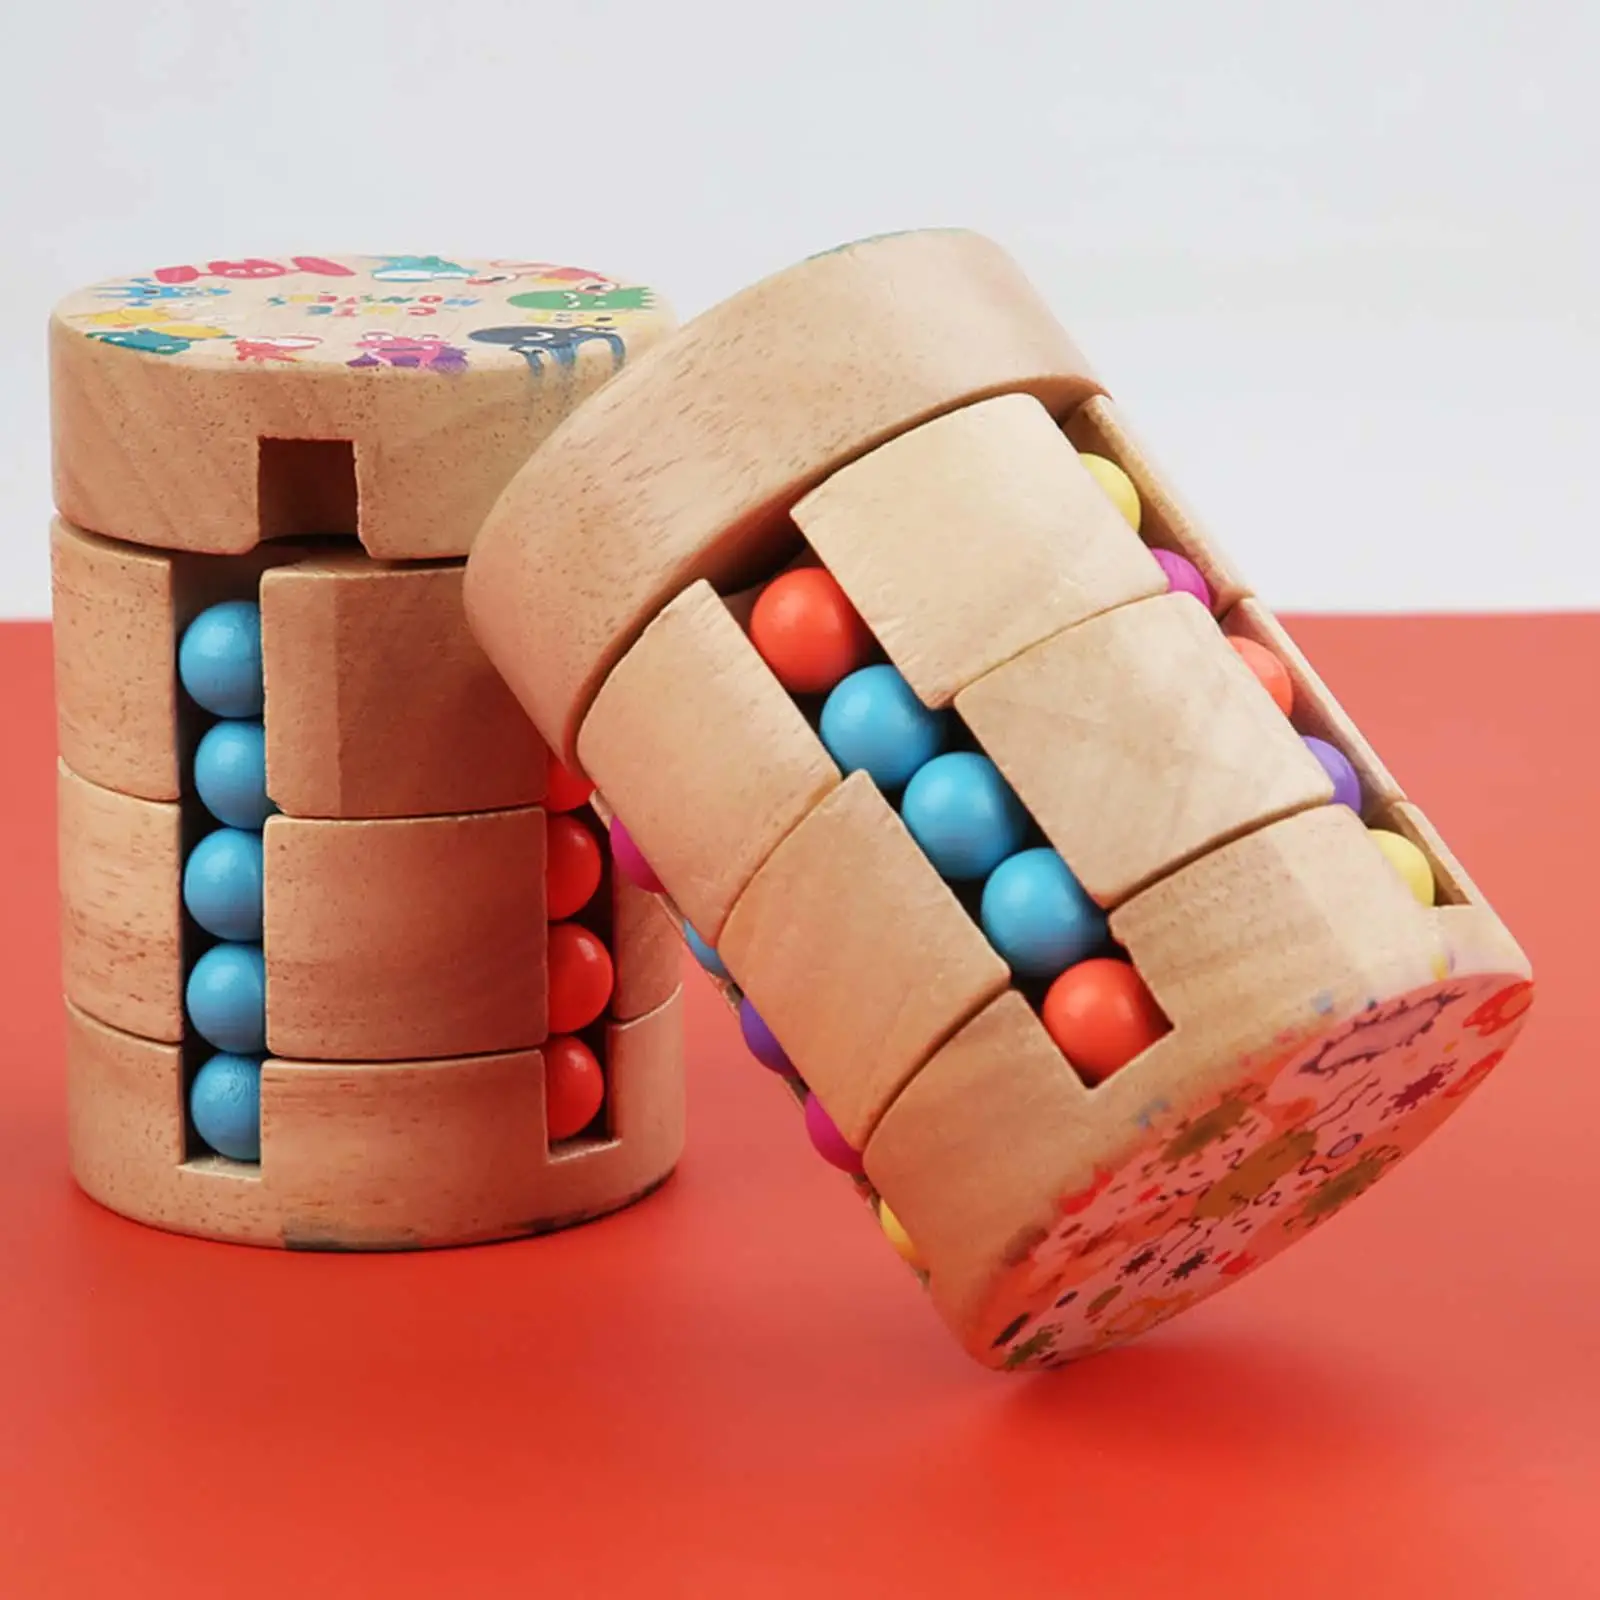 Wooden Beads Educational Intelligence Development Toy Play Fun for Boys Girls Kids Birthday Gifts